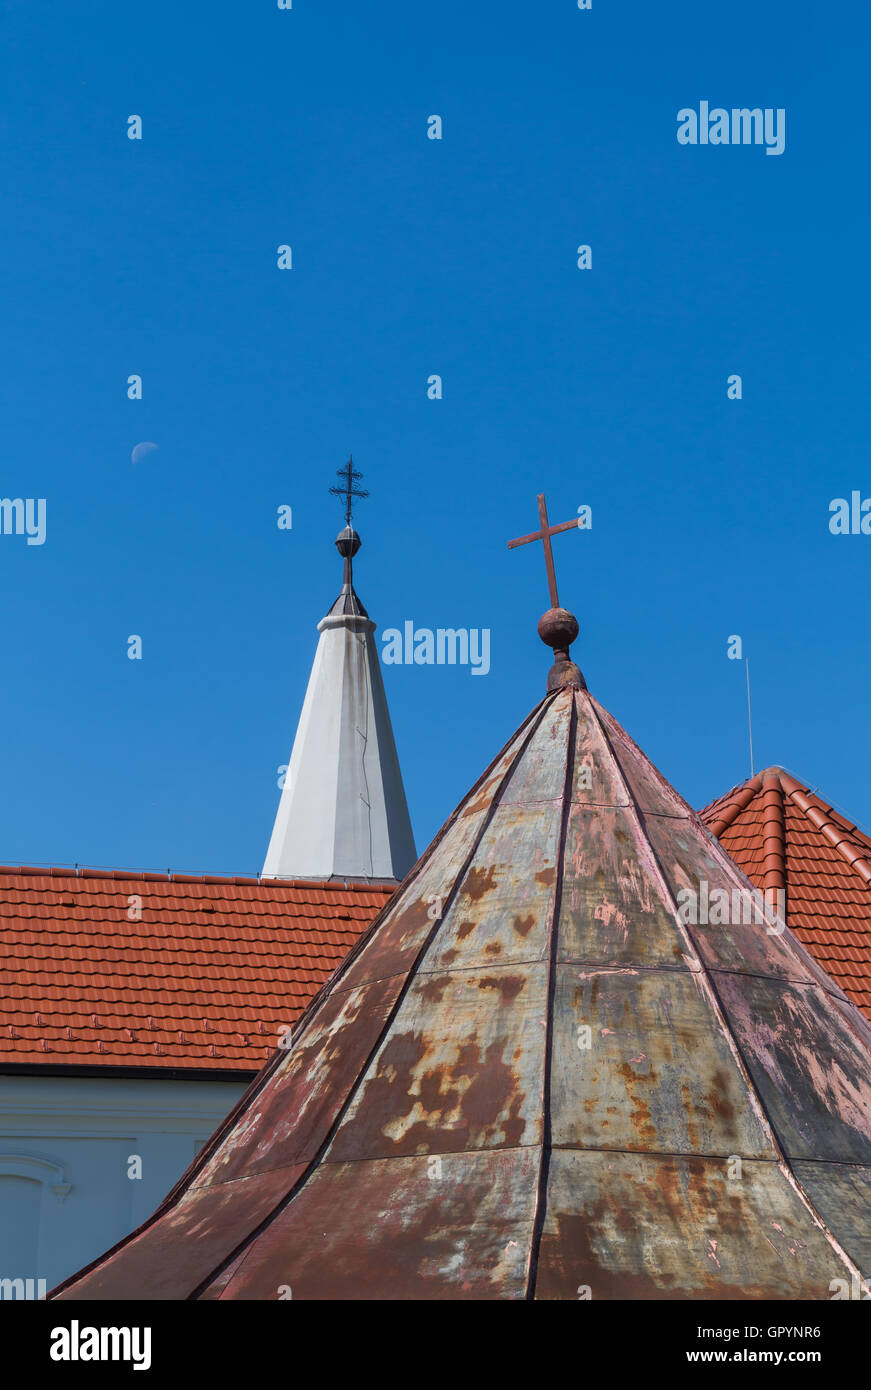 Older and new parts of the roofs of the church of Saint Peter and Paul in Cifer, Slovakia. Two crosses on the top of the towers. Stock Photo